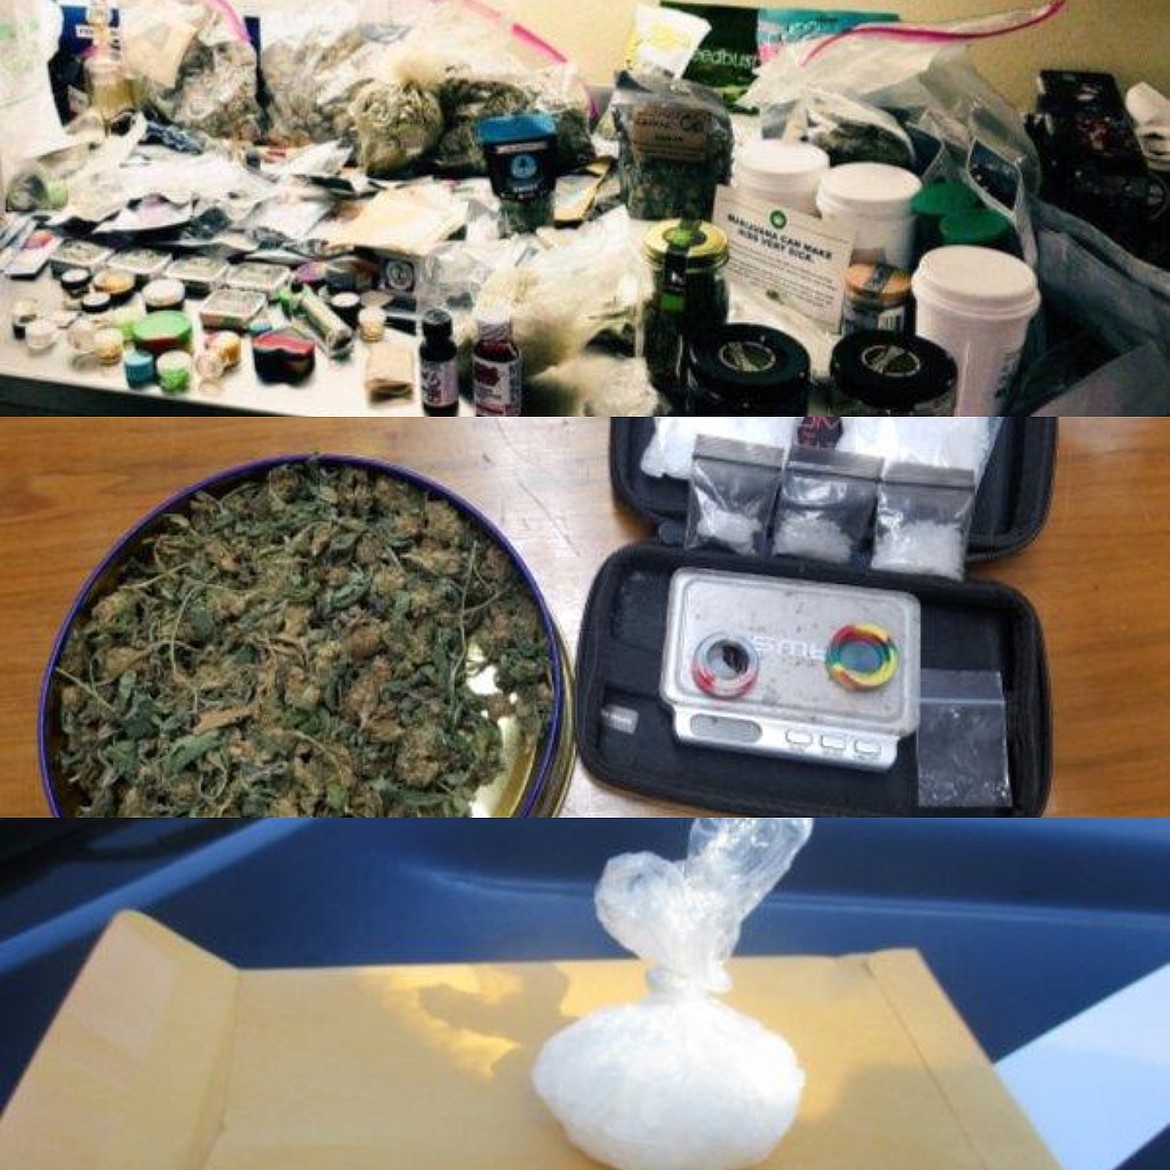 Courtesy photos/
Several examples of drugs seized by SCSO and other law enforcement agencies with the help of Lulu in the past 7 months.
(Top) Various amounts of illegal substances seized during an ISP emphasis, with the help of Lulu.
(Middle) A sizable amount of marijuana, methamphetamine, and paraphernalia found by Lulu.
(Bottom) Methamphetamine recovered from a traffic stop Lulu was apart of.